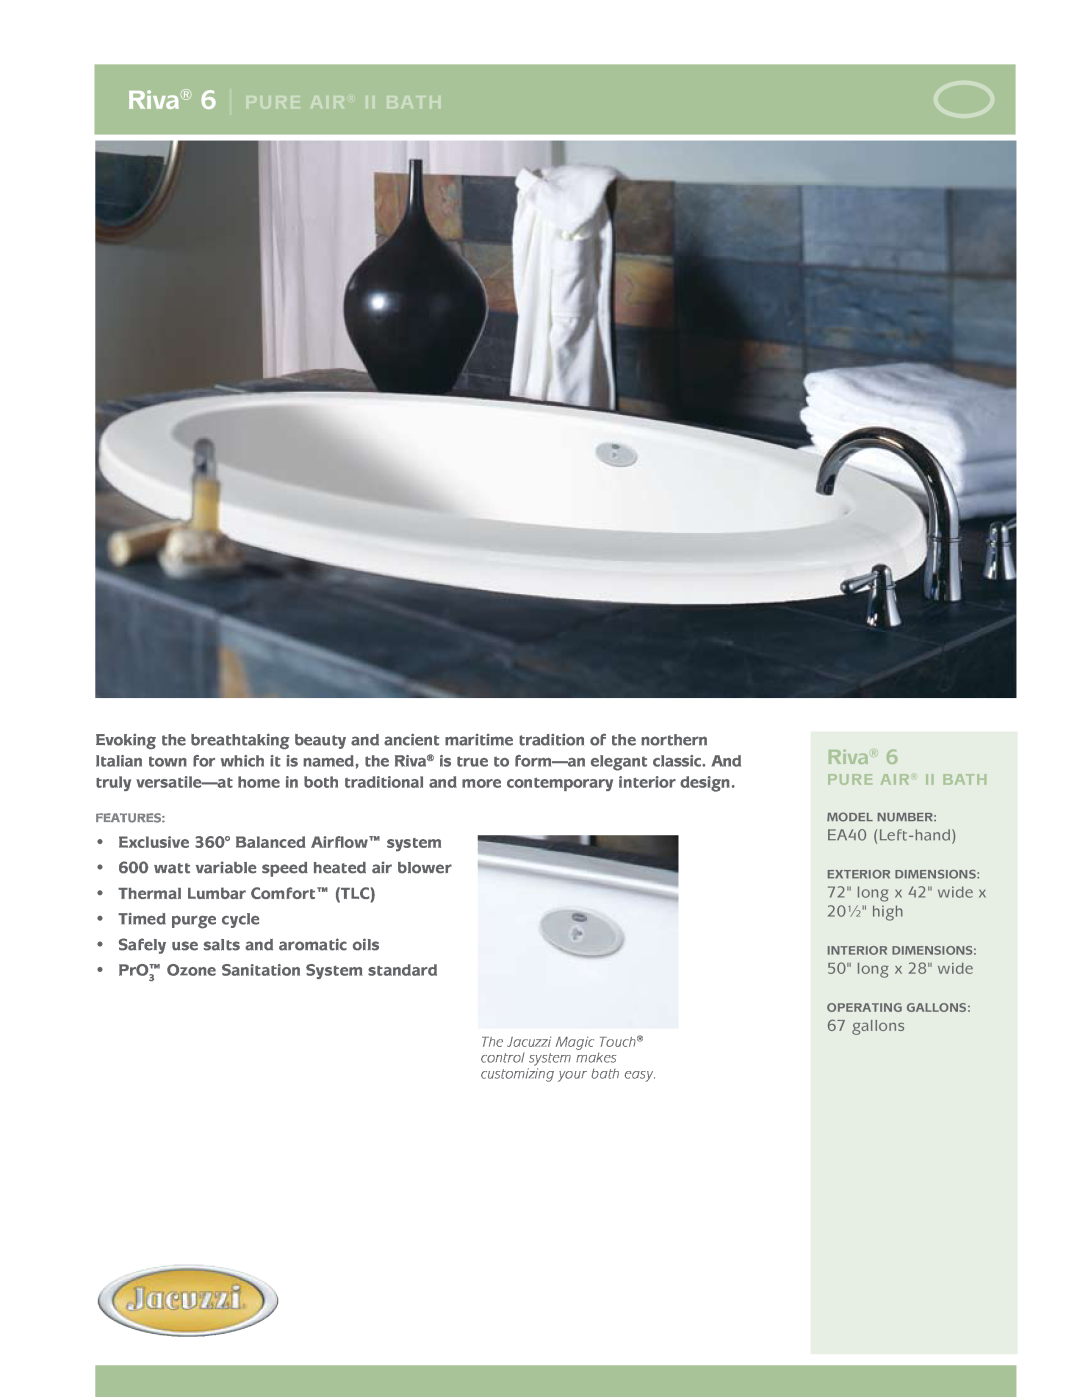 Jacuzzi dimensions EA40 Left-hand, long x 42 wide x 20½ high, long x 28 wide, gallons, Riva 6 pure air ii Bath 